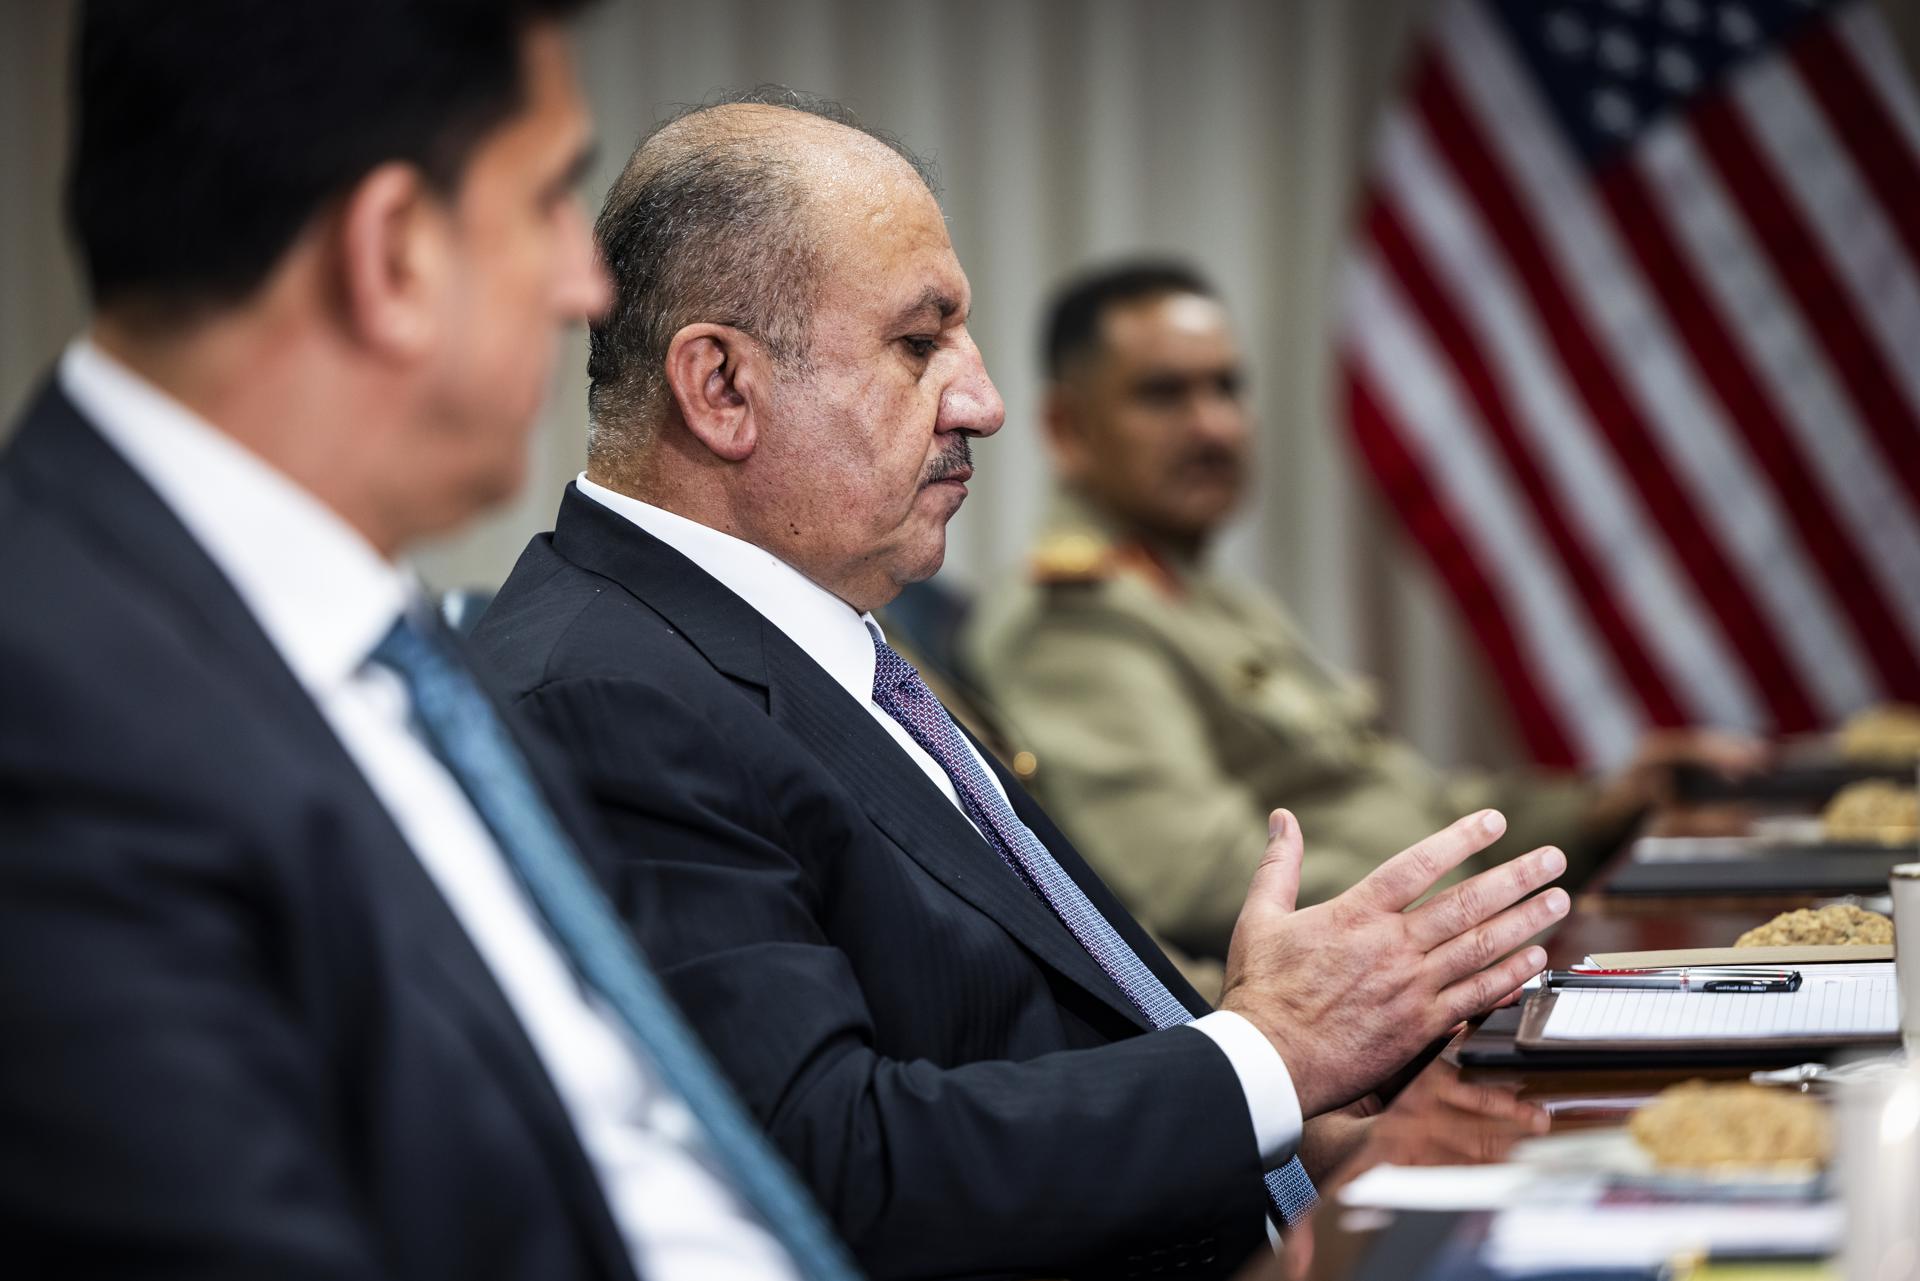 Iraqi Minister of Defense Thabit Muhammad Al-Abbasi (C) attends a meeting with US Secretary of Defense Lloyd Austin (not pictured) inside the Pentagon in Arlington, Virginia, USA, 07 August 2023. EFE/EPA/FILE/JIM LO SCALZO